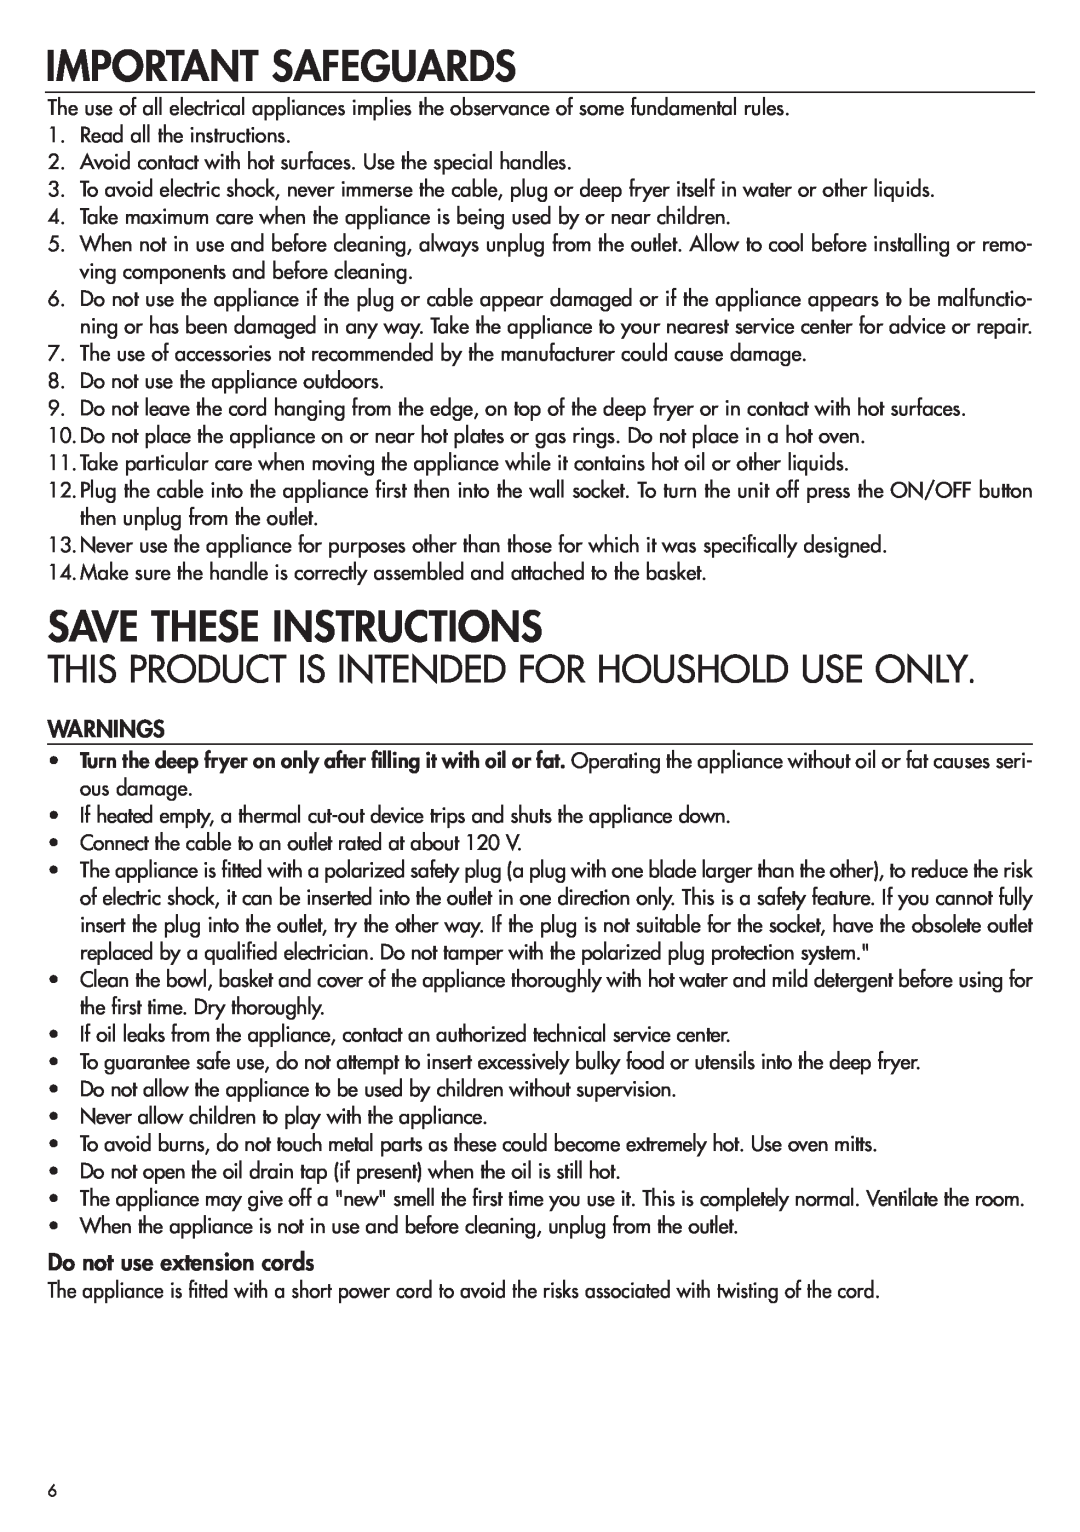 DeLonghi D28313 manual Important Safeguards, Save These Instructions, Warnings, Do not use extension cords 